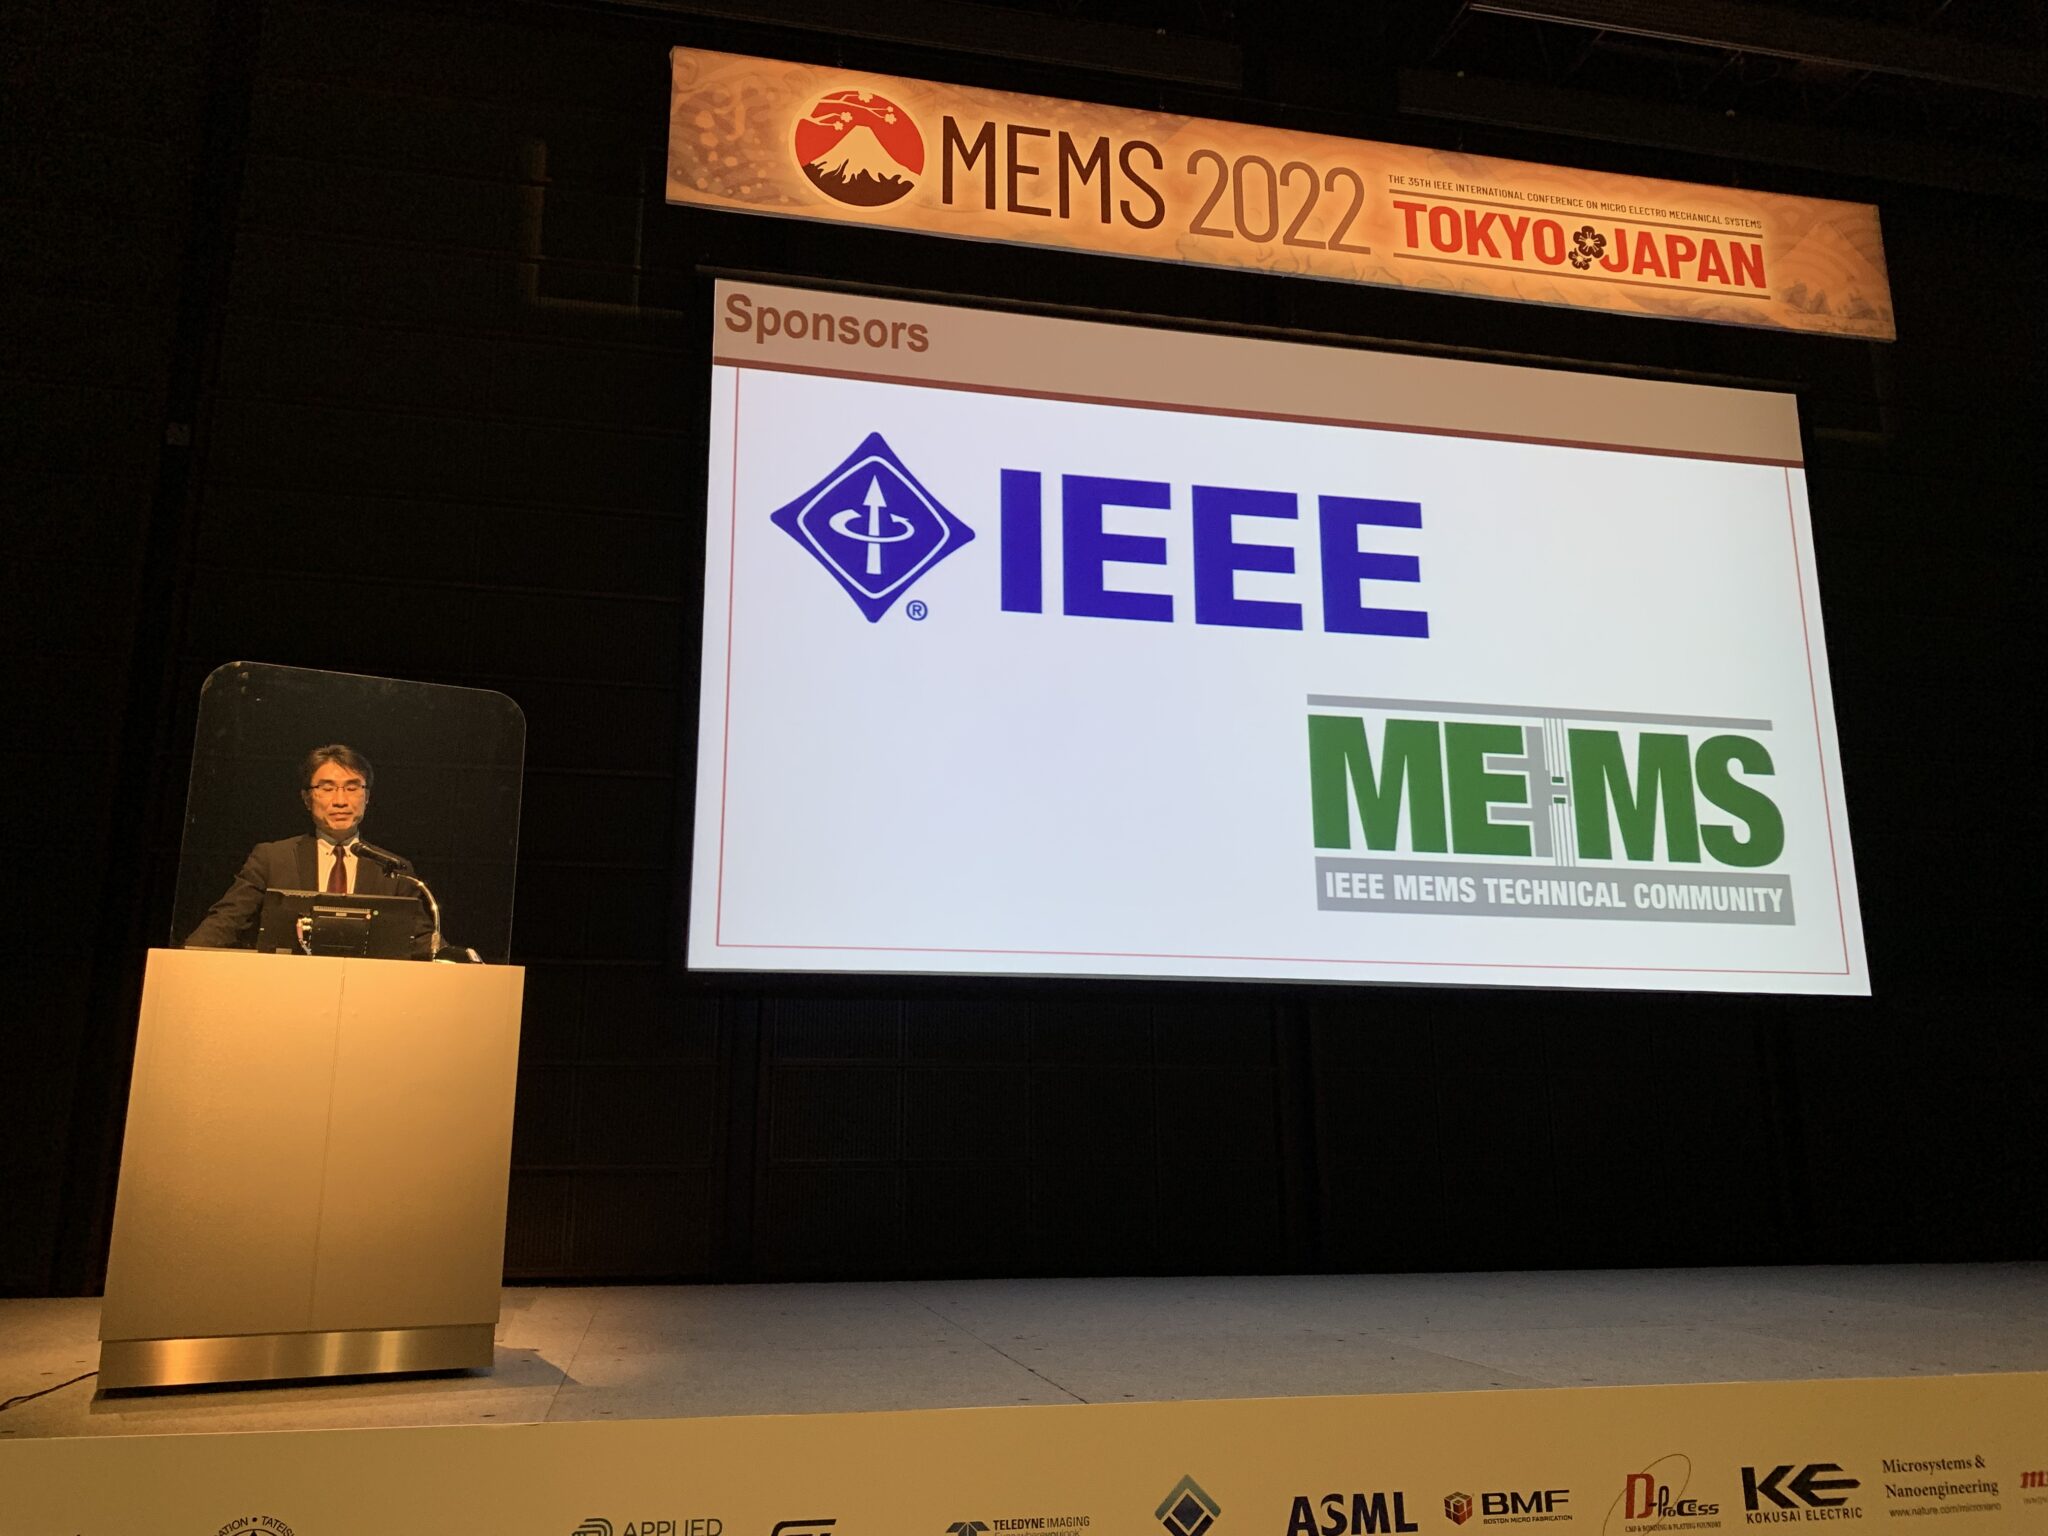 MEMS’22 Conference The IEEE MEMS Technical Community